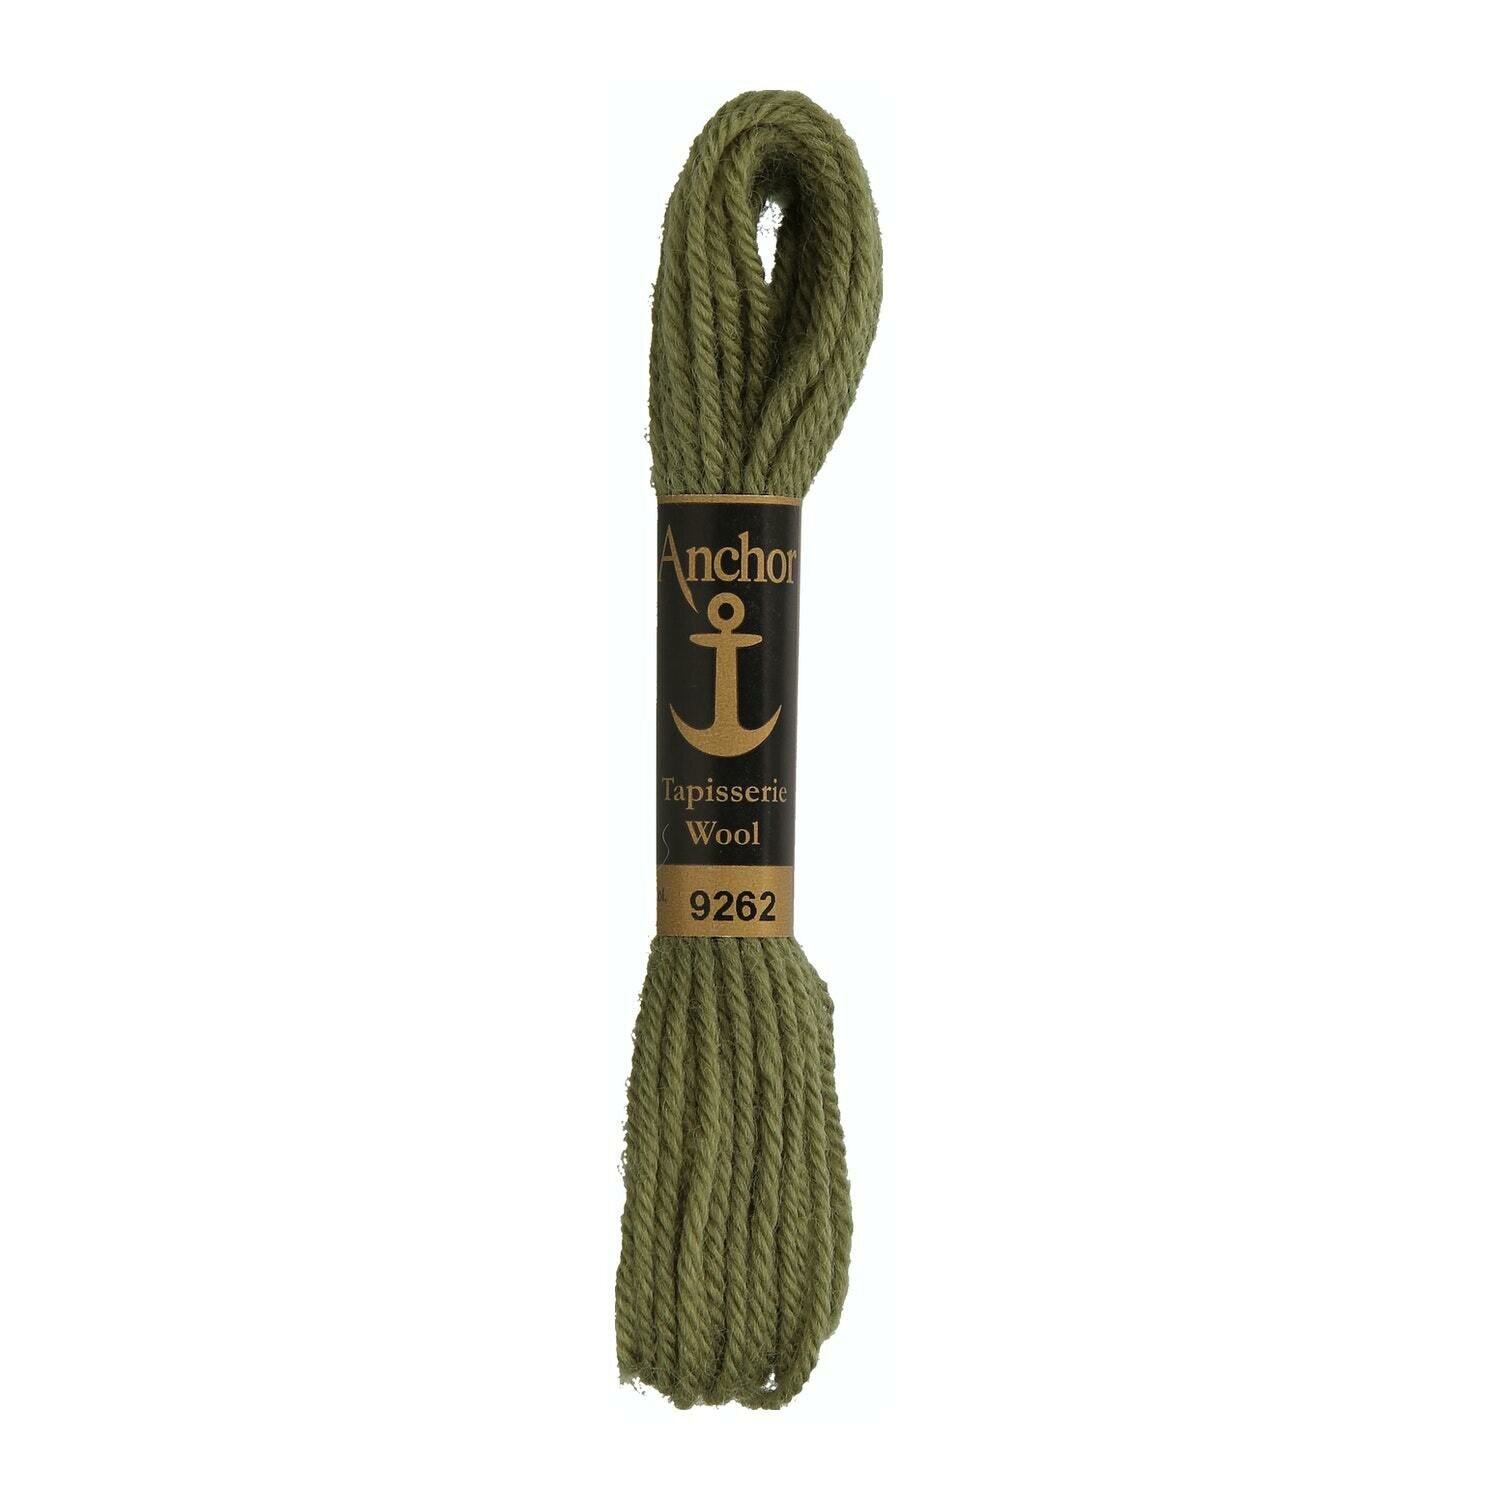 Anchor Tapisserie Wool # 09262